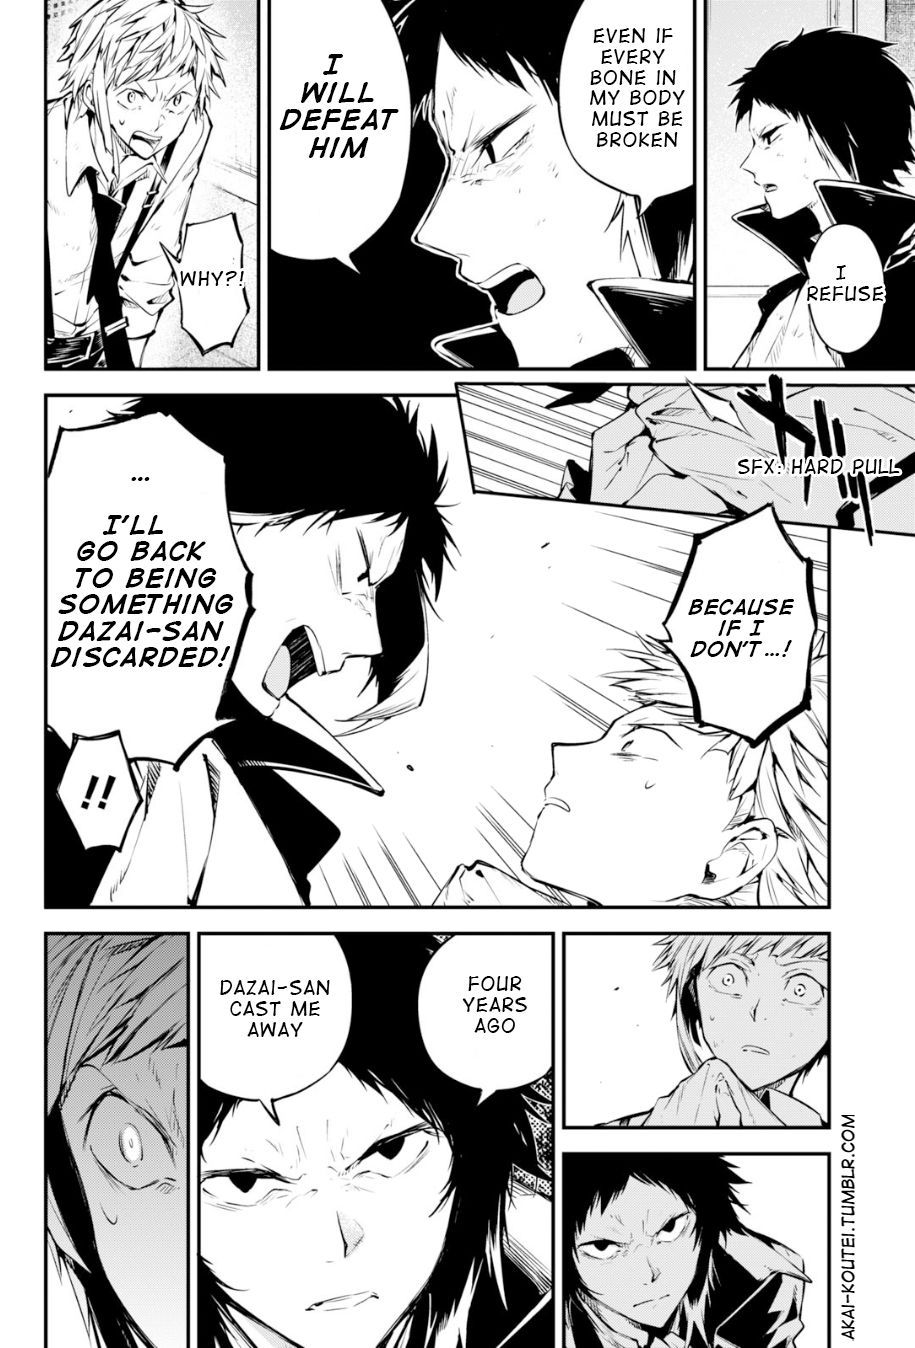 Bungo Stray Dogs chapter 85 page 3